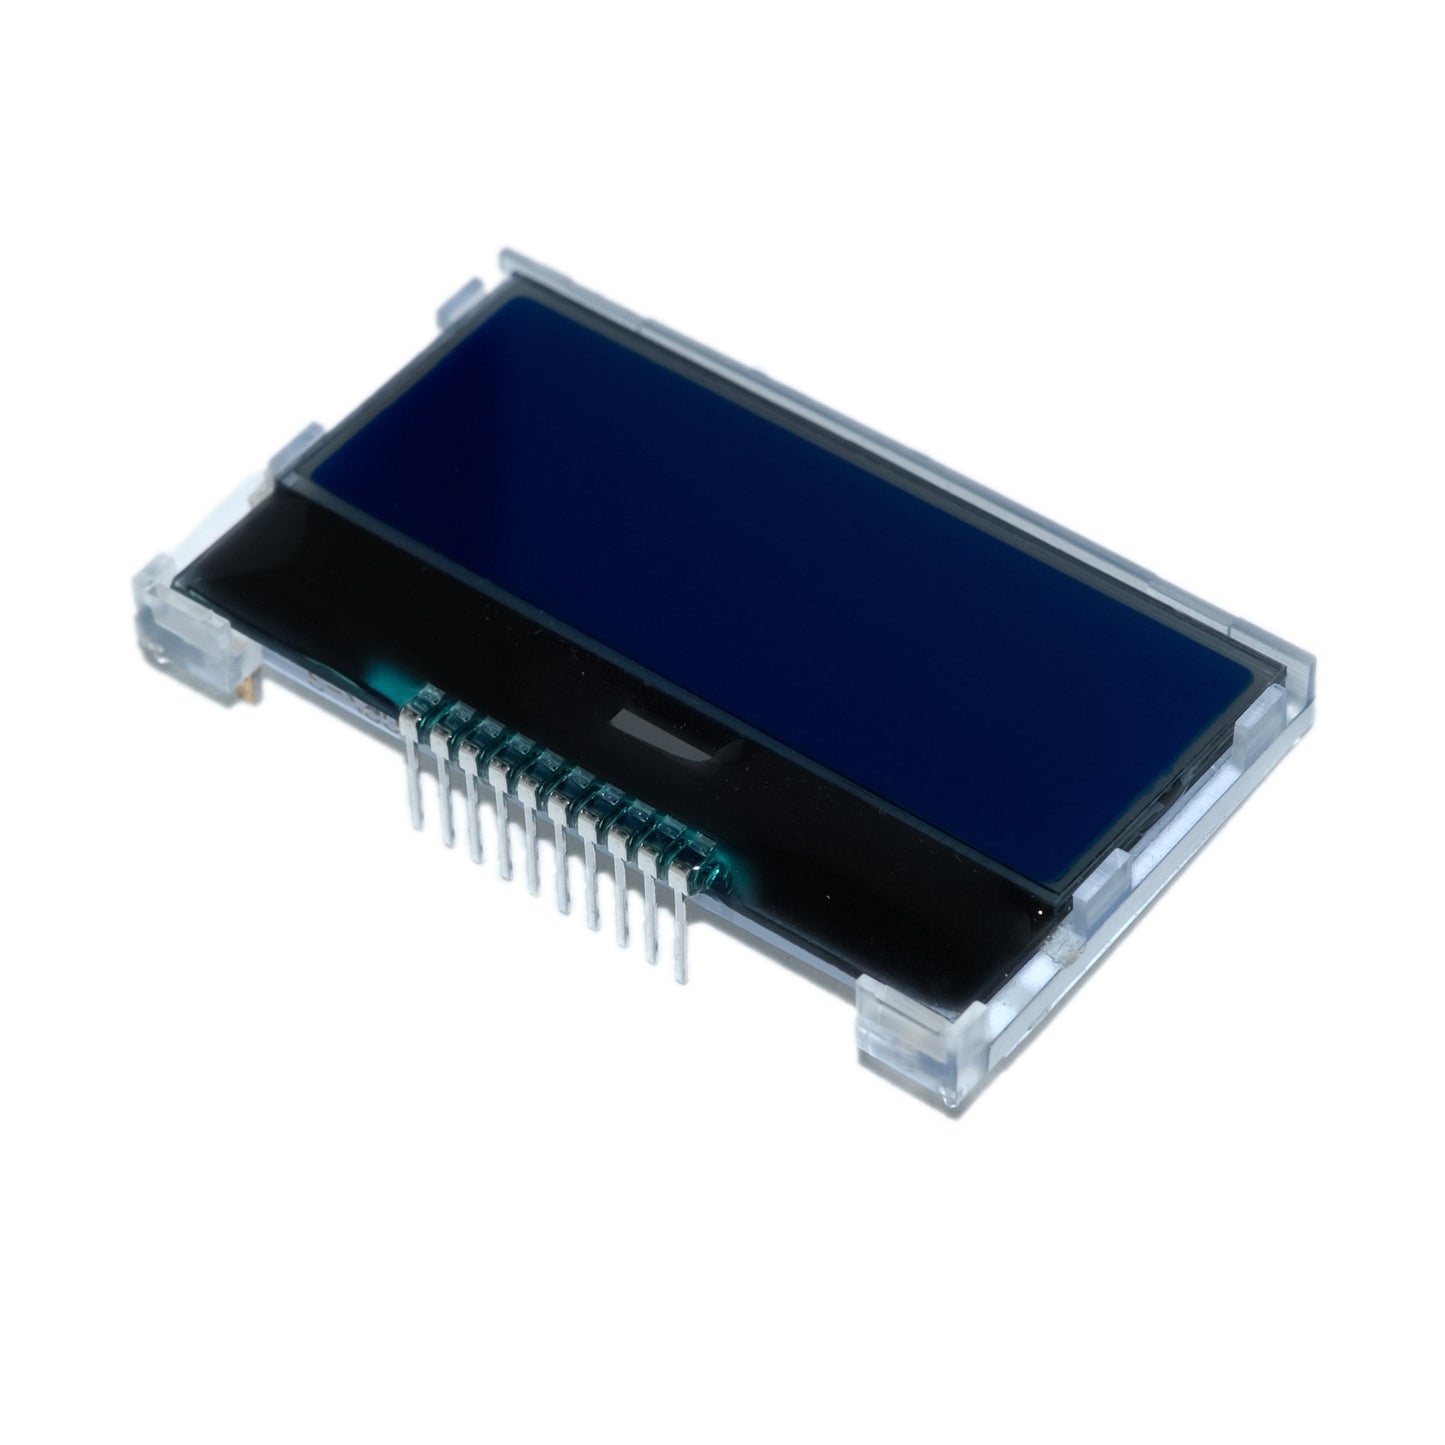 top view of 16x2 character COG LCD module